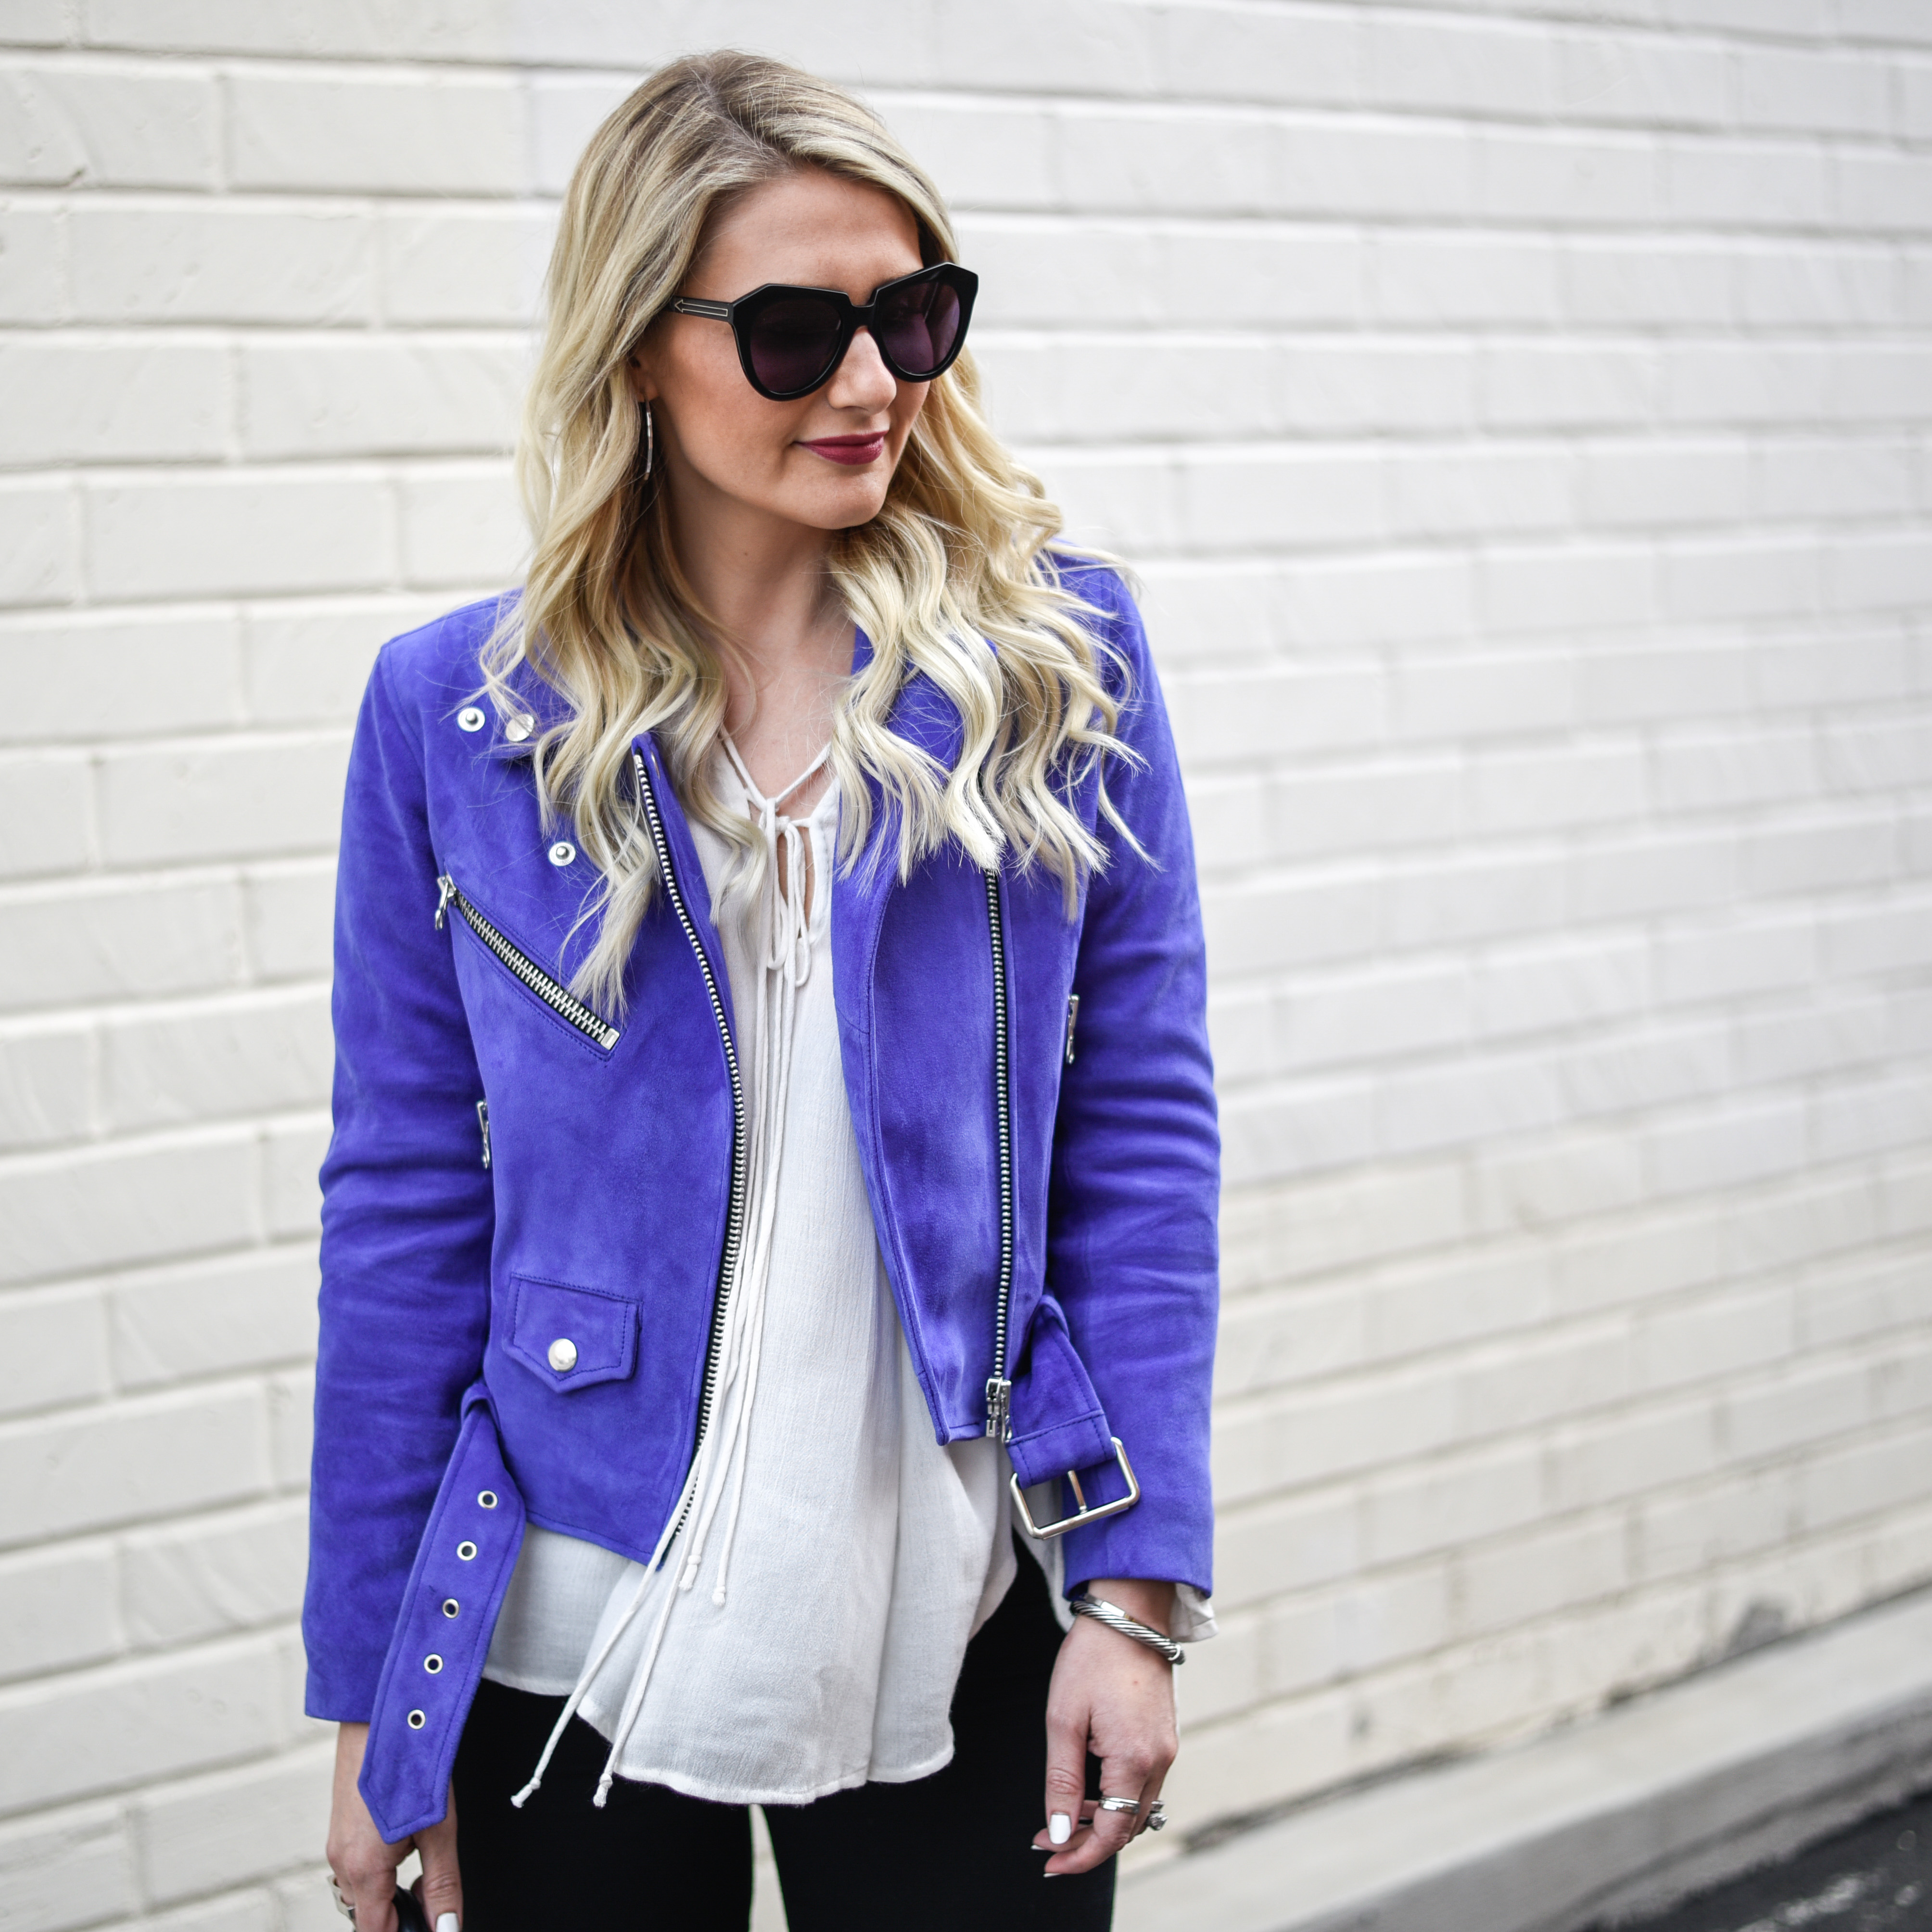 Making a statement with a purple modo jacket and edgy details. 